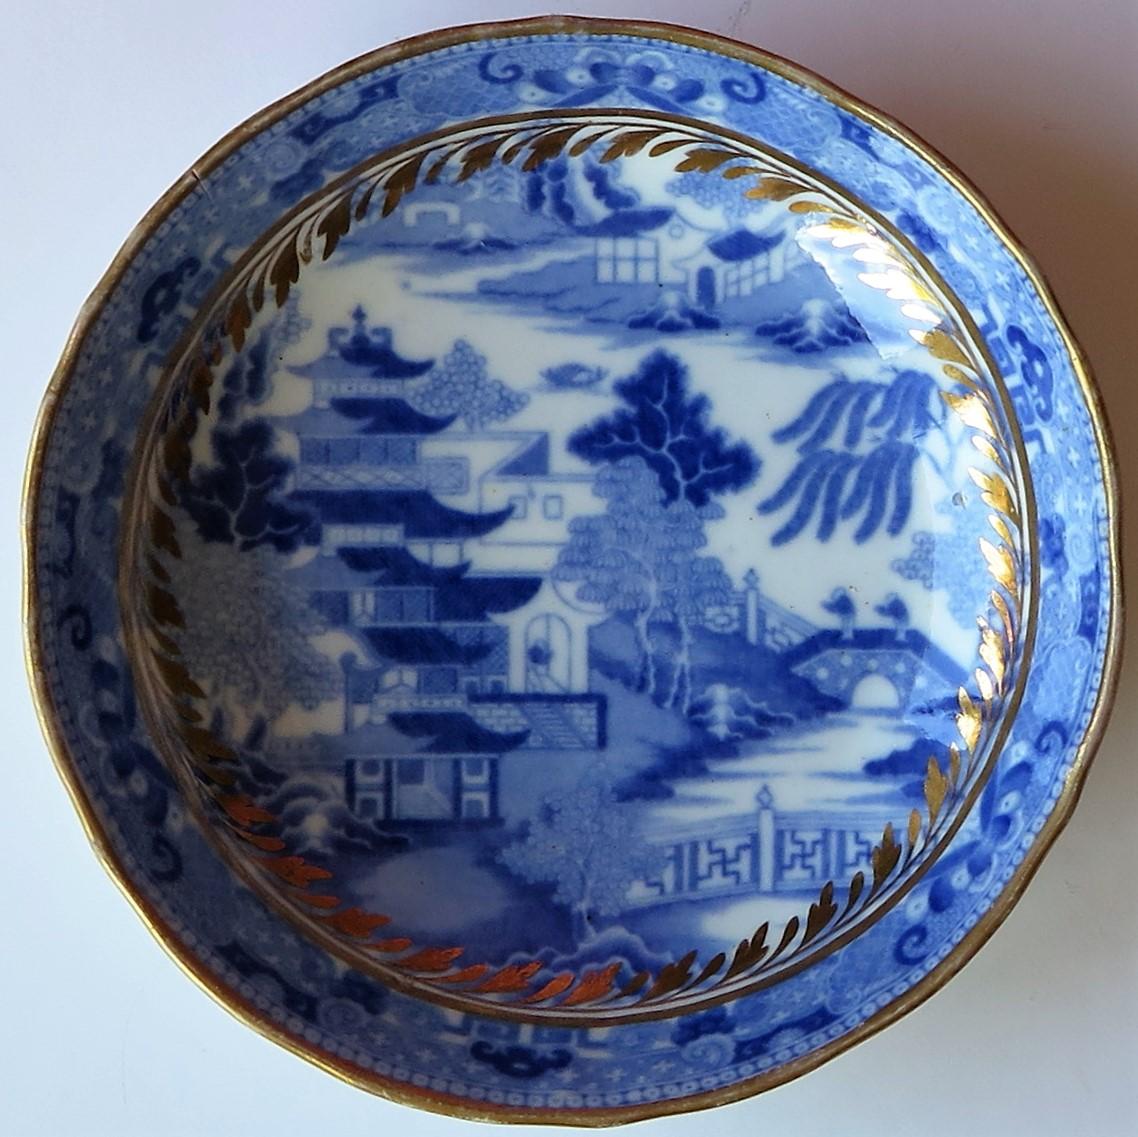 English Miles Mason Porcelain Saucer Dish Blue and White Gilded Broseley Pattern Ca 1805